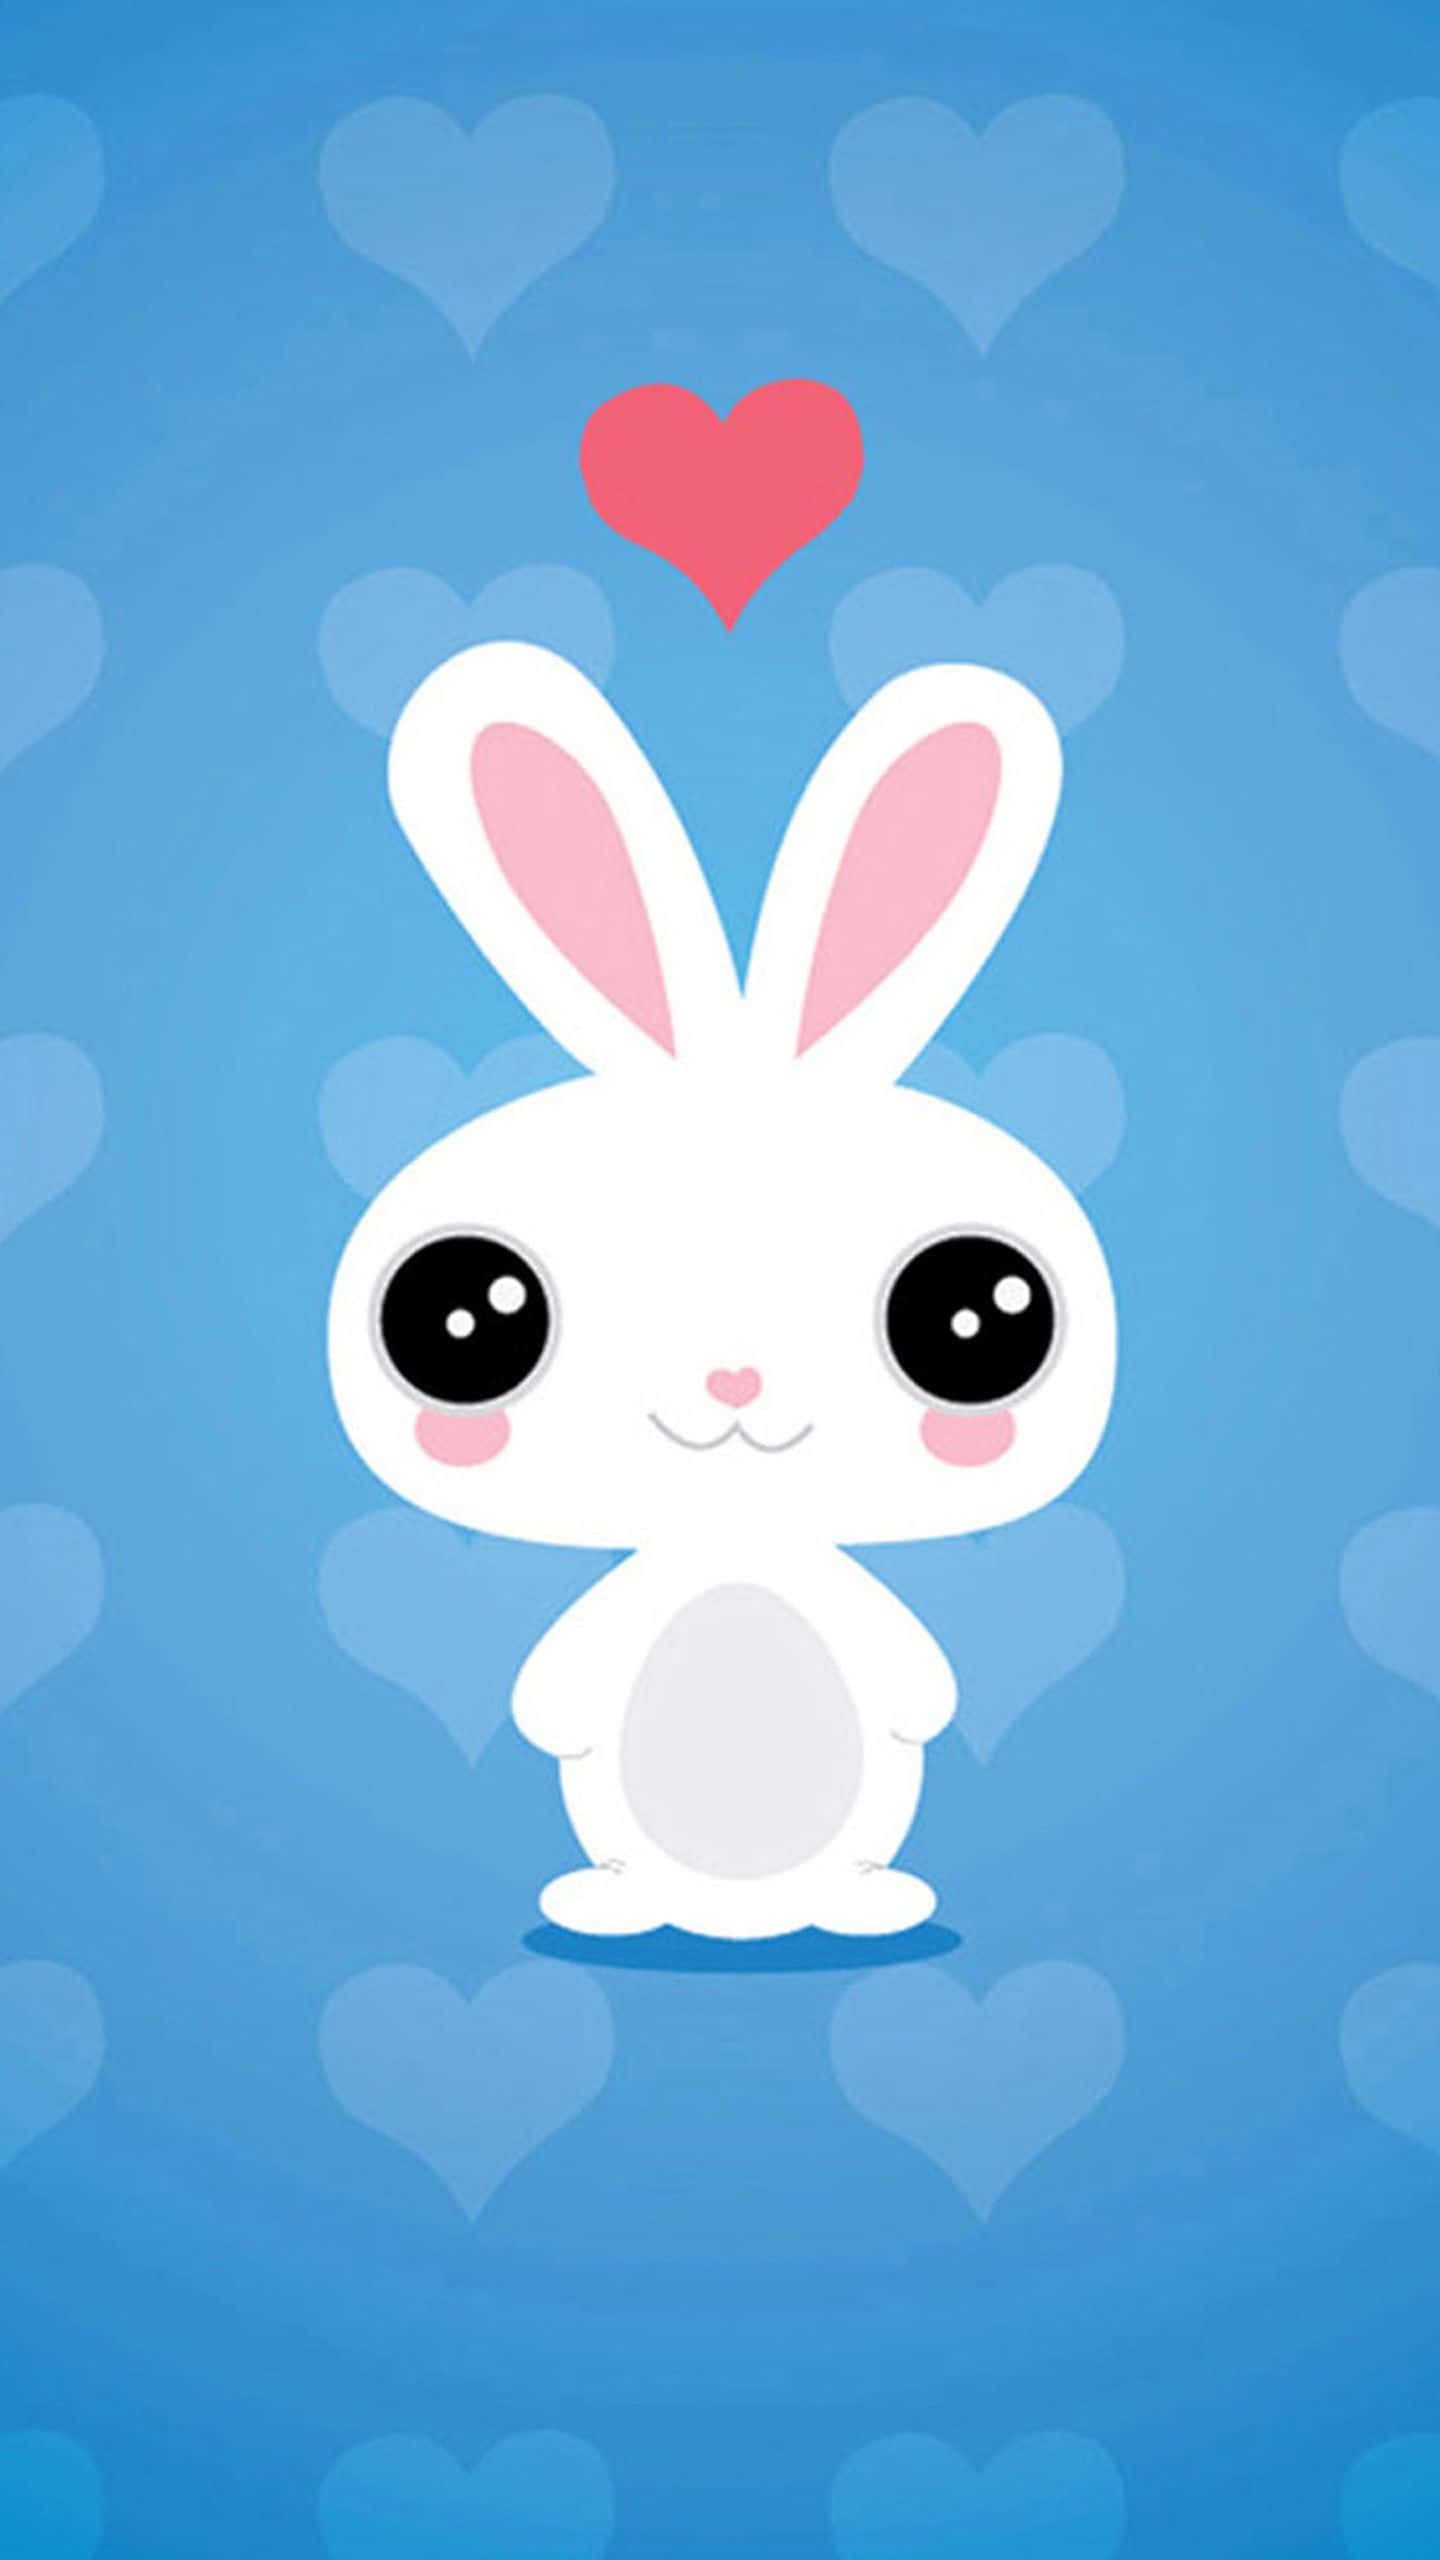 Download Cute Kawaii Bunny is here for a cuddle!